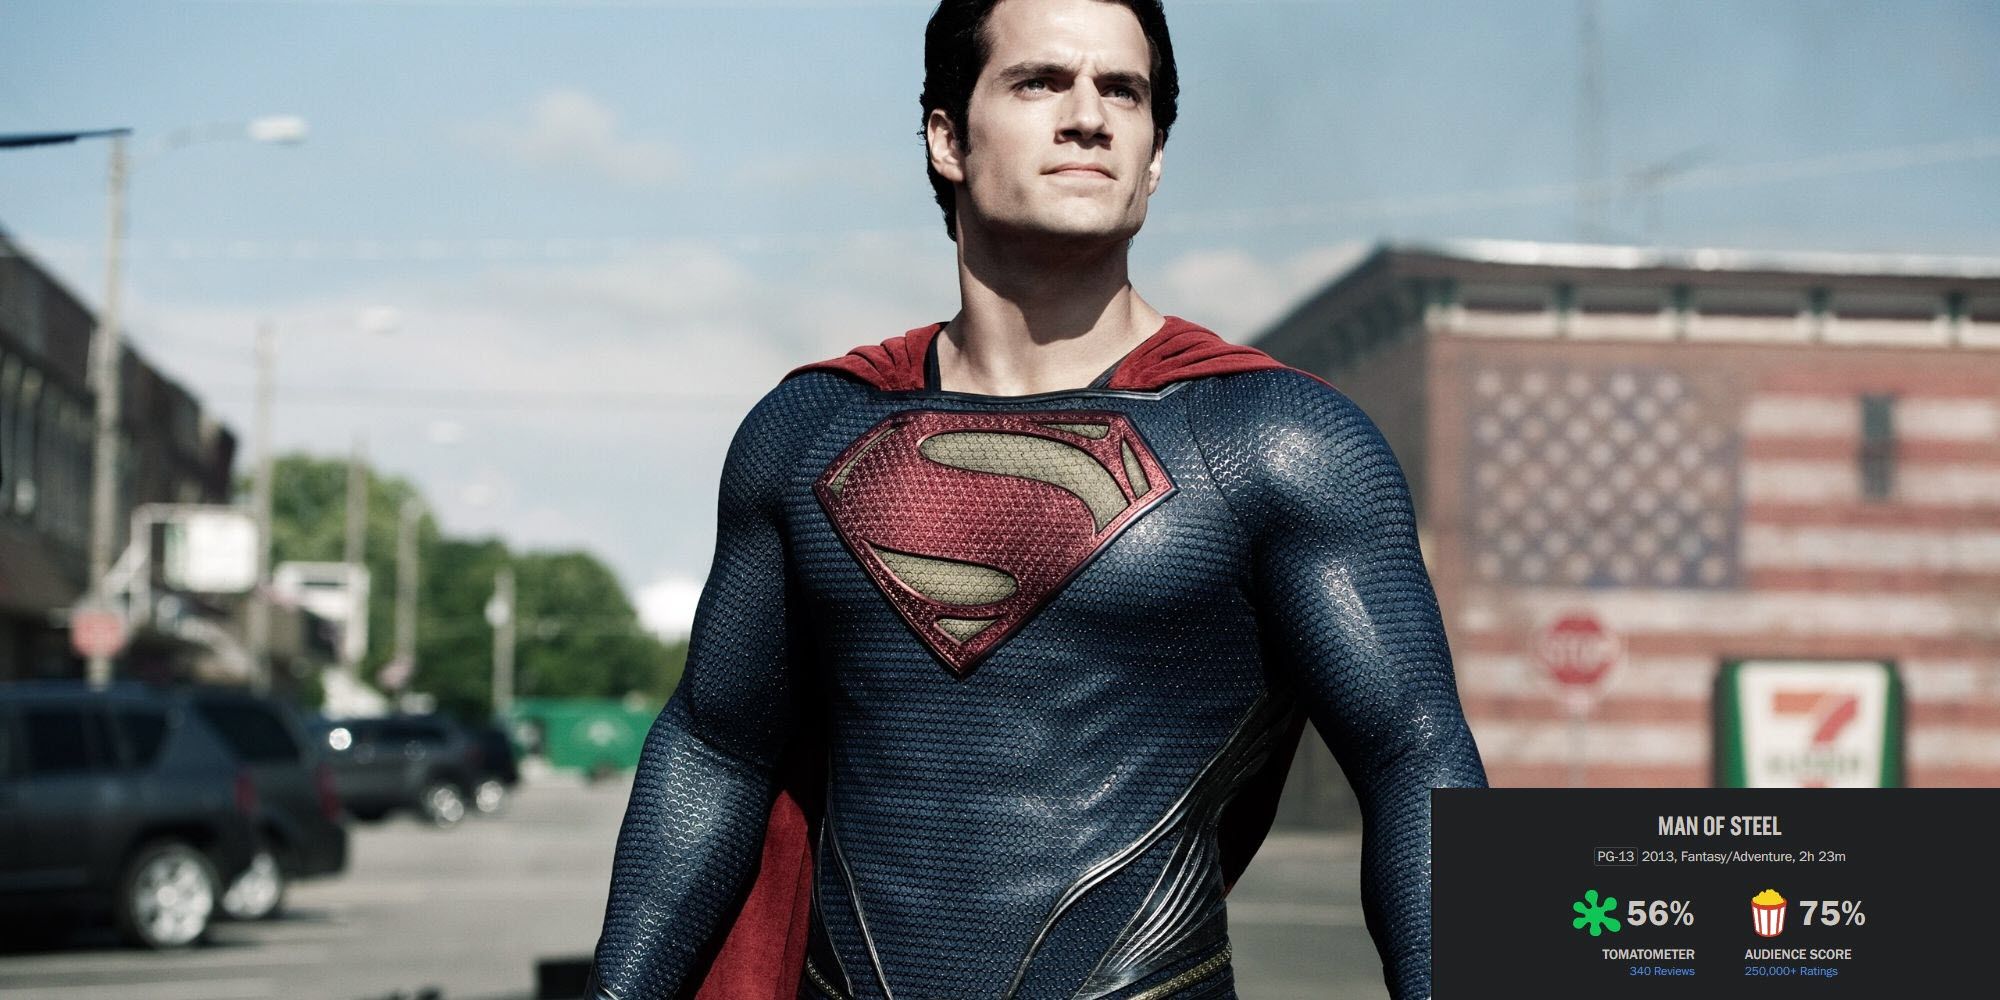 image from Man of Steel featuring Henry Cavill as Superman wearing the suit